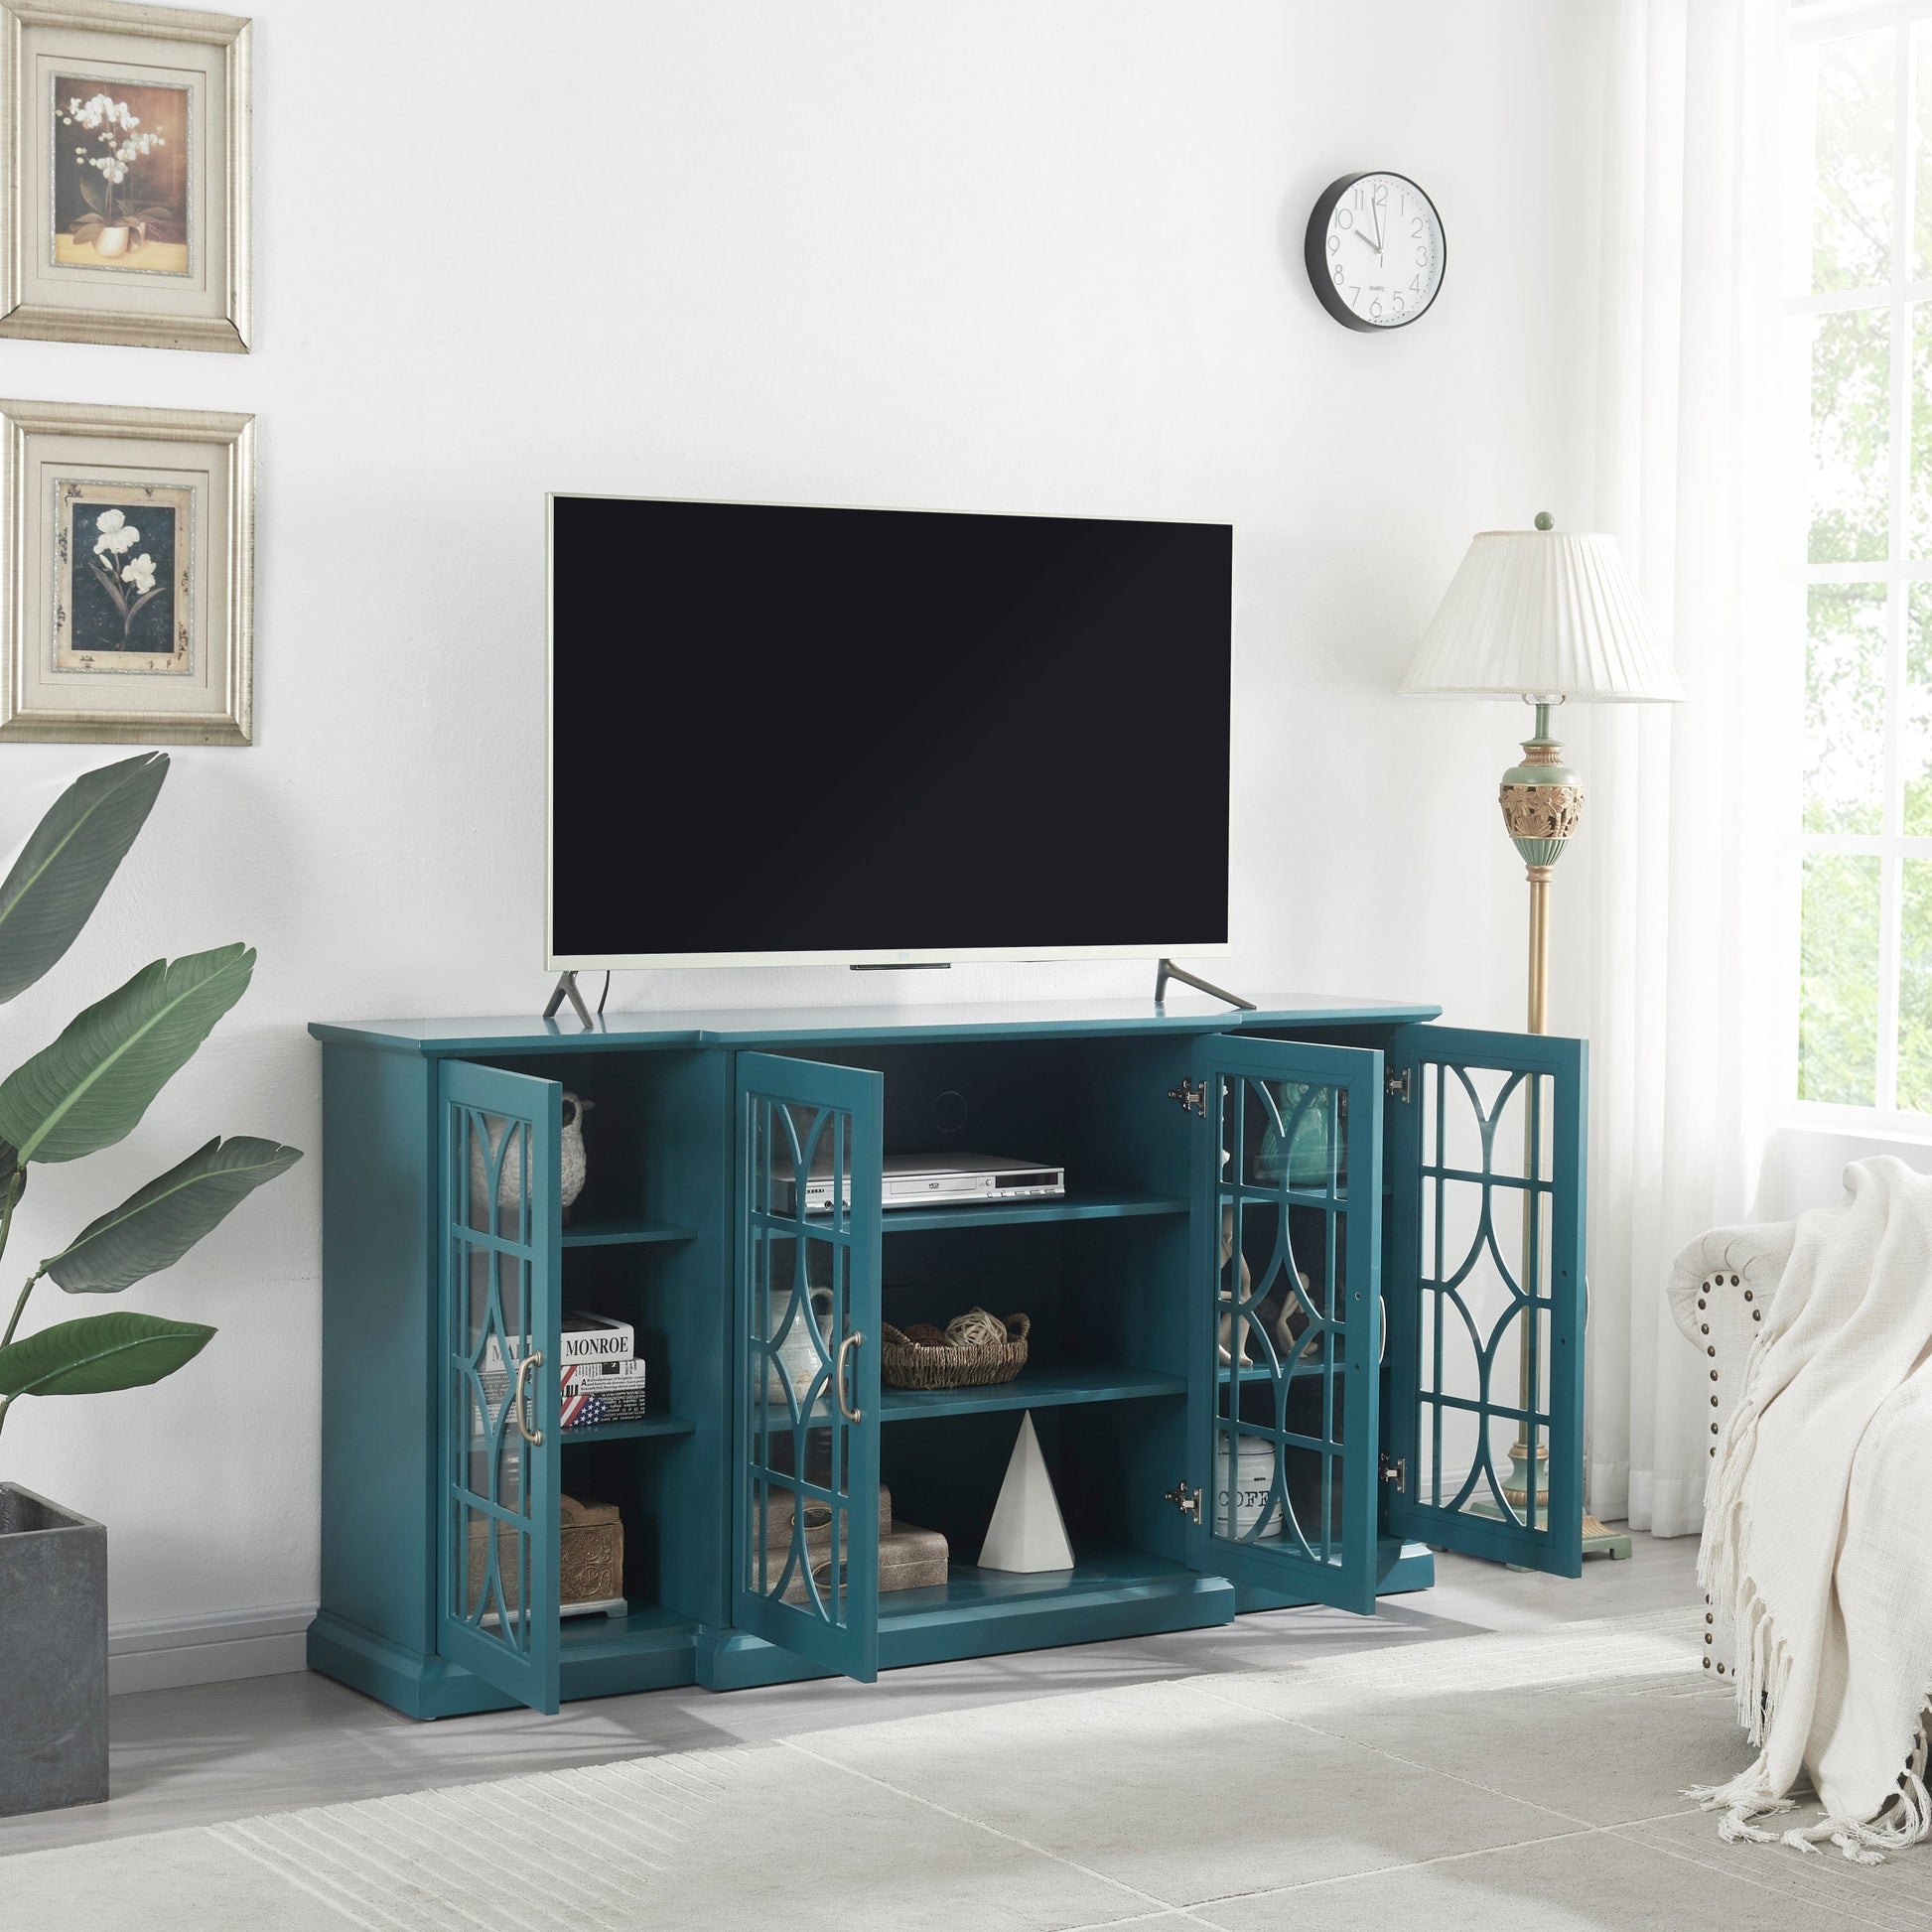 1st Choice Furniture Direct TV Stand 1st Choice Teal Blue 63" TV Stand with Glass Door & Adjustable Shelves